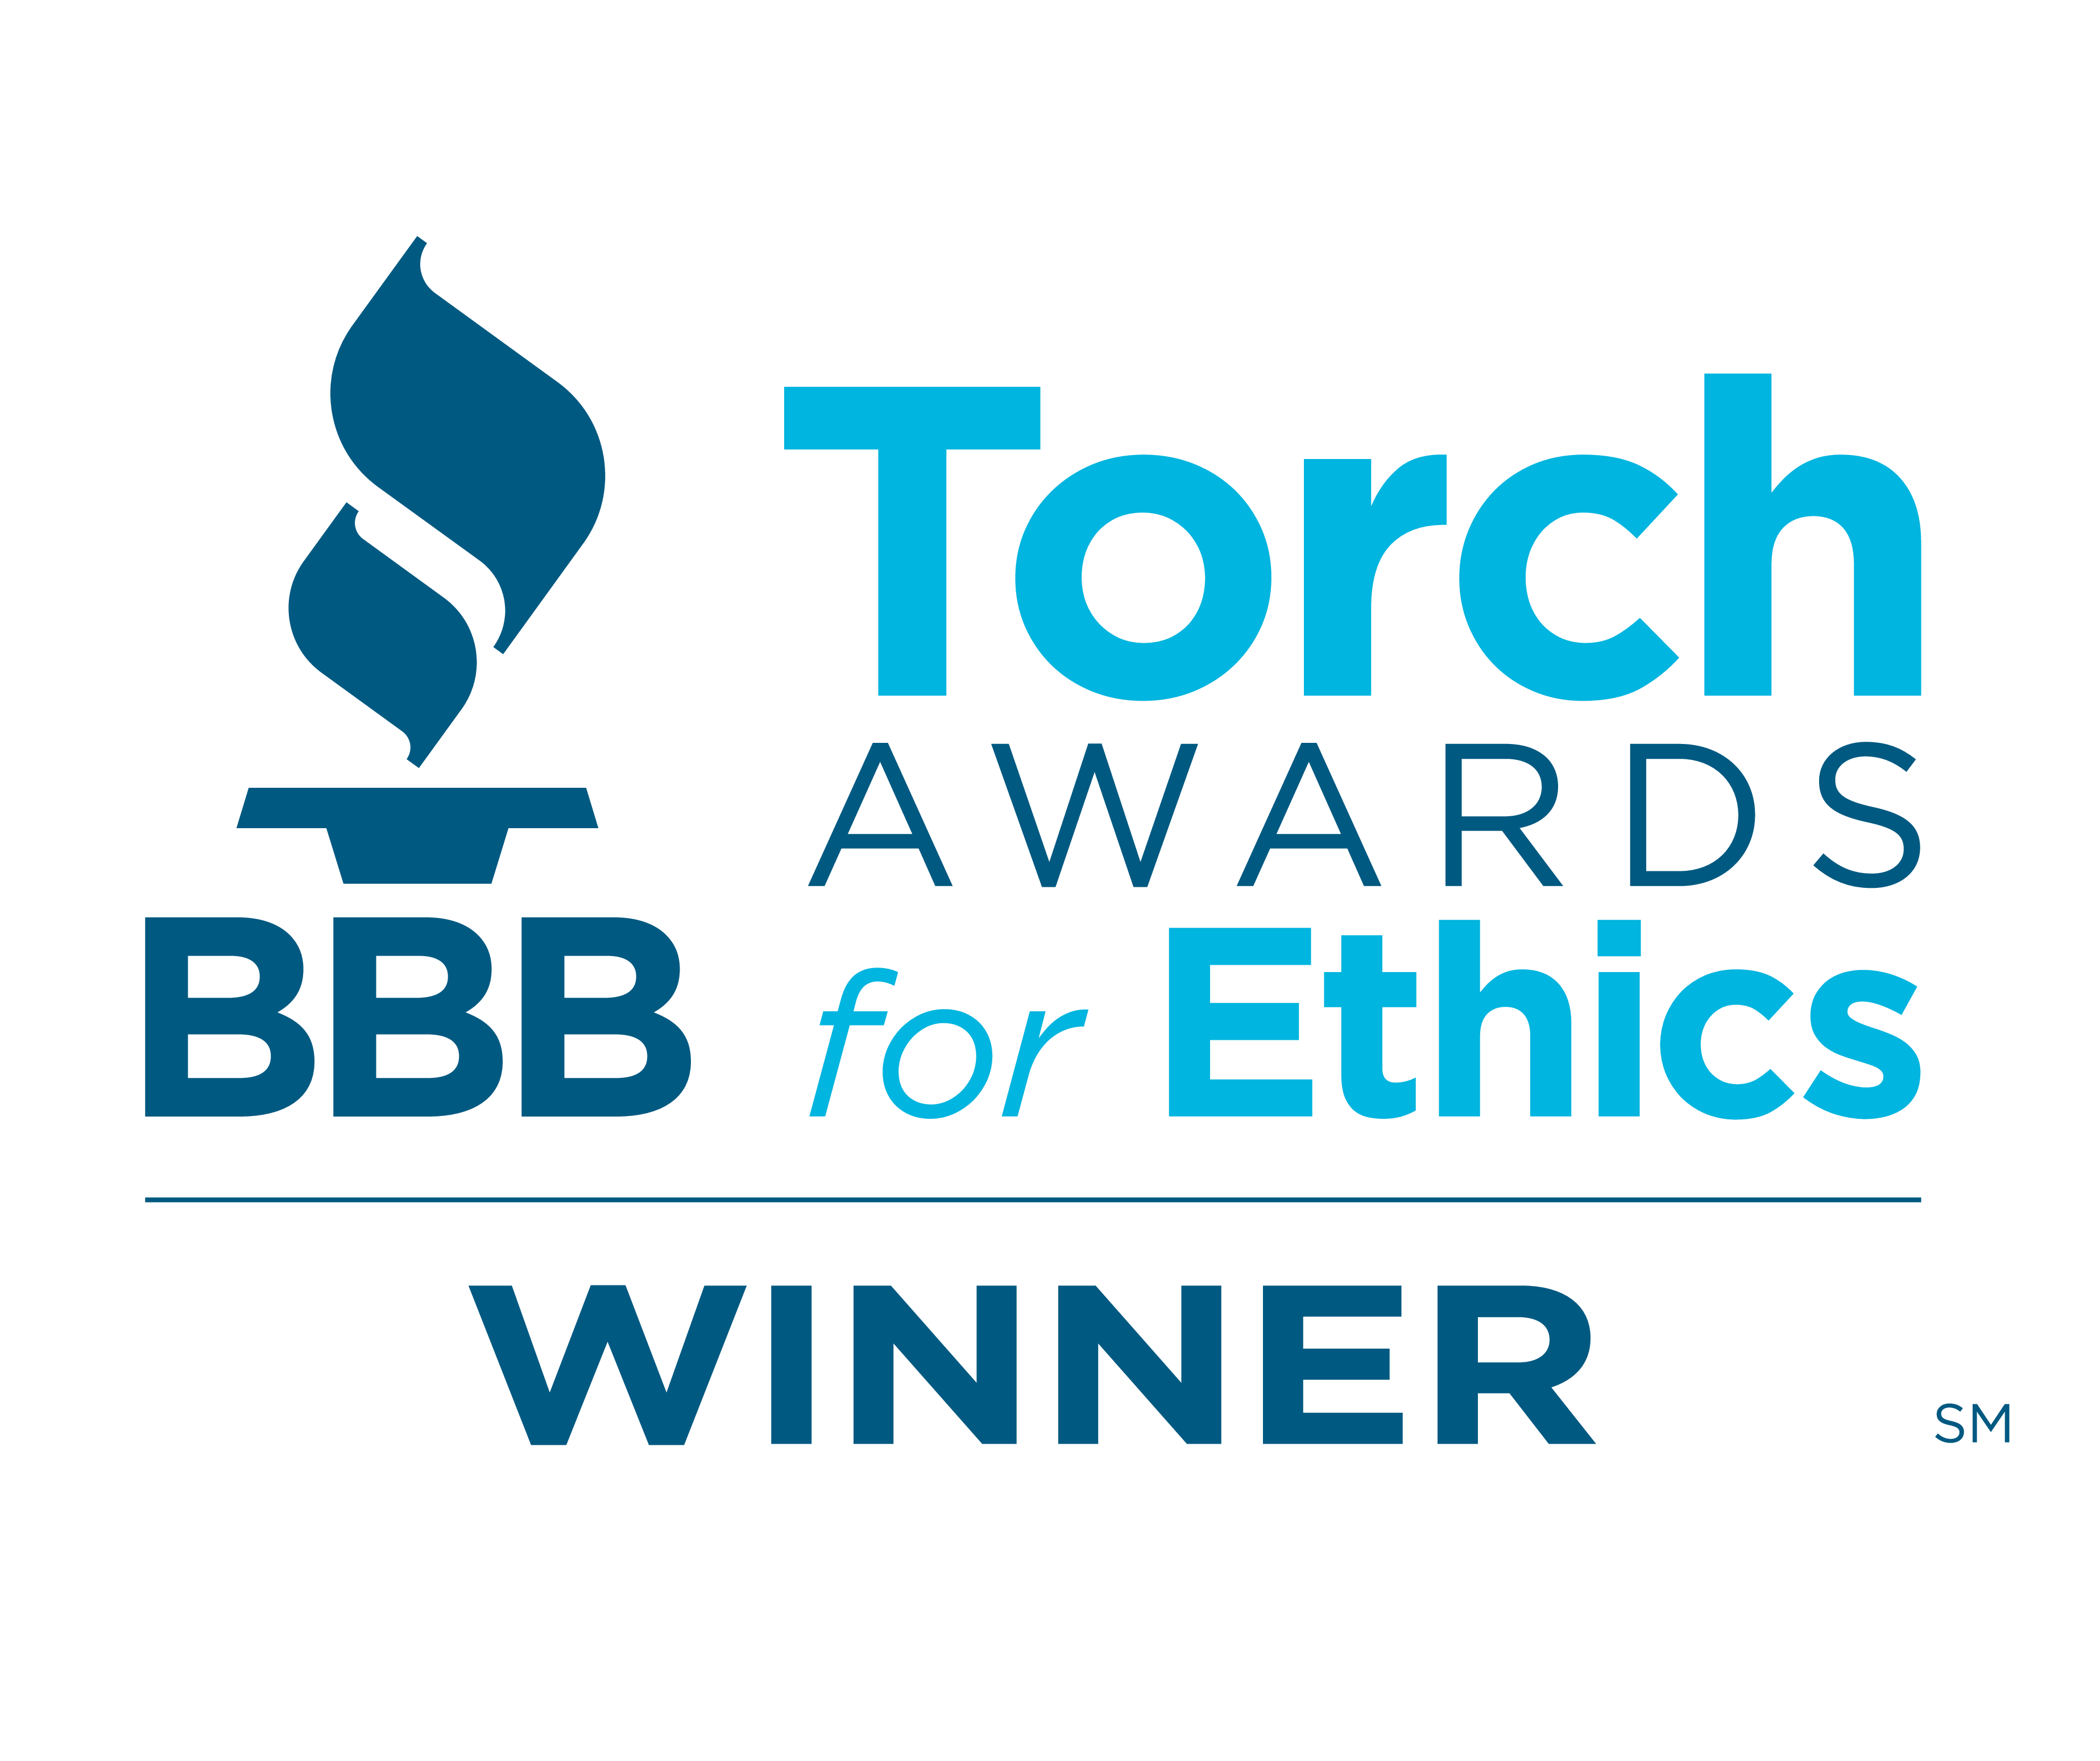 BBB - Torch Awards for Ethics